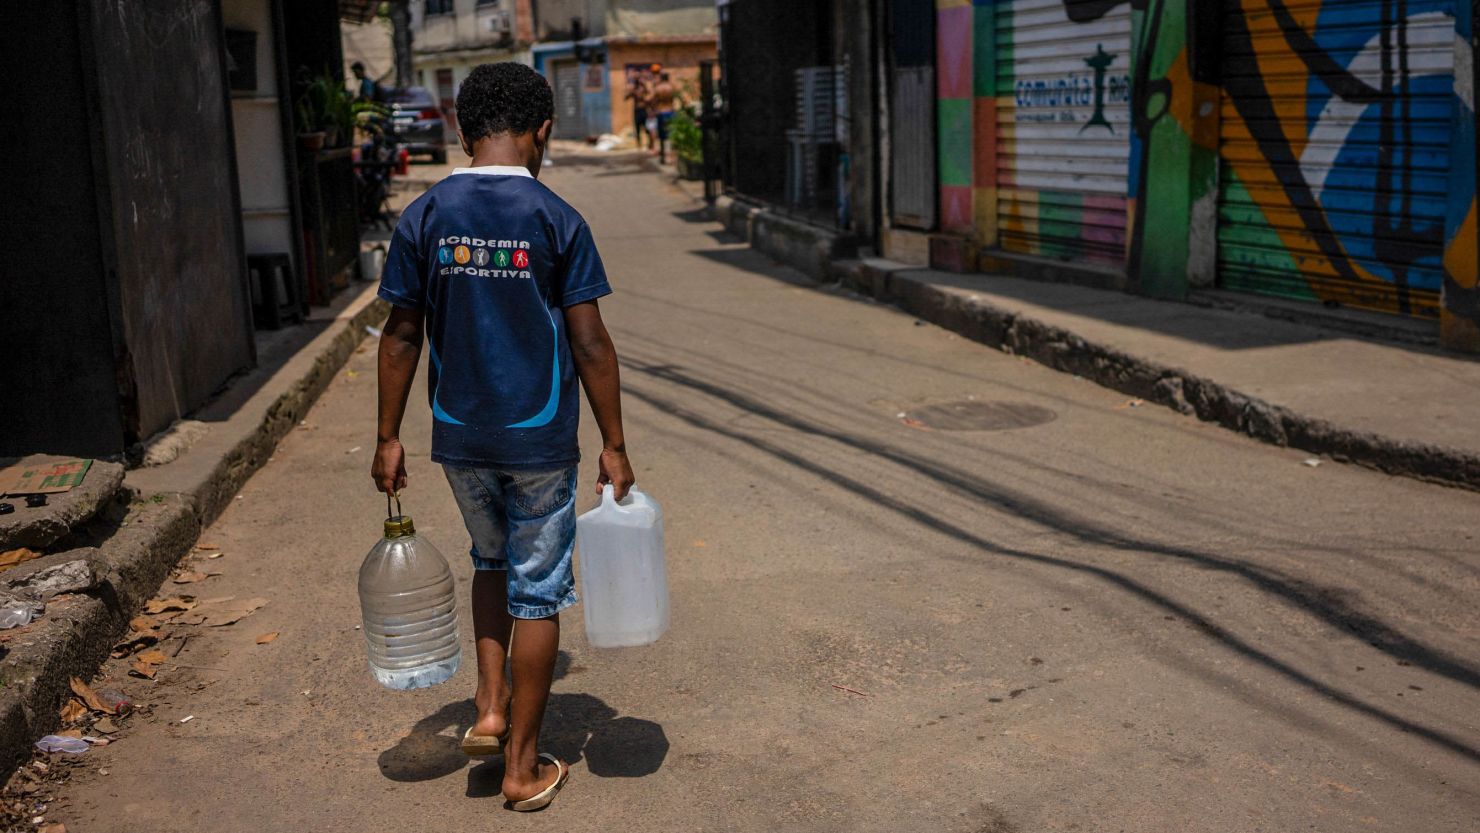 A resident of Rocinha slum carries water collected from a natural spring during a heat wave in Rio de Janeiro, Brazil, on November 17, 2023. The heatwave that has been affecting much of Brazil for several days continues, with stifling temperatures in cities like Rio de Janeiro, where the heat index reached a record of 58.5 °C (137.3 degrees Fahrenheit), as reported by authorities. (Photo by Tercio TEIXEIRA / AFP) (Photo by TERCIO TEIXEIRA/AFP via Getty Images)